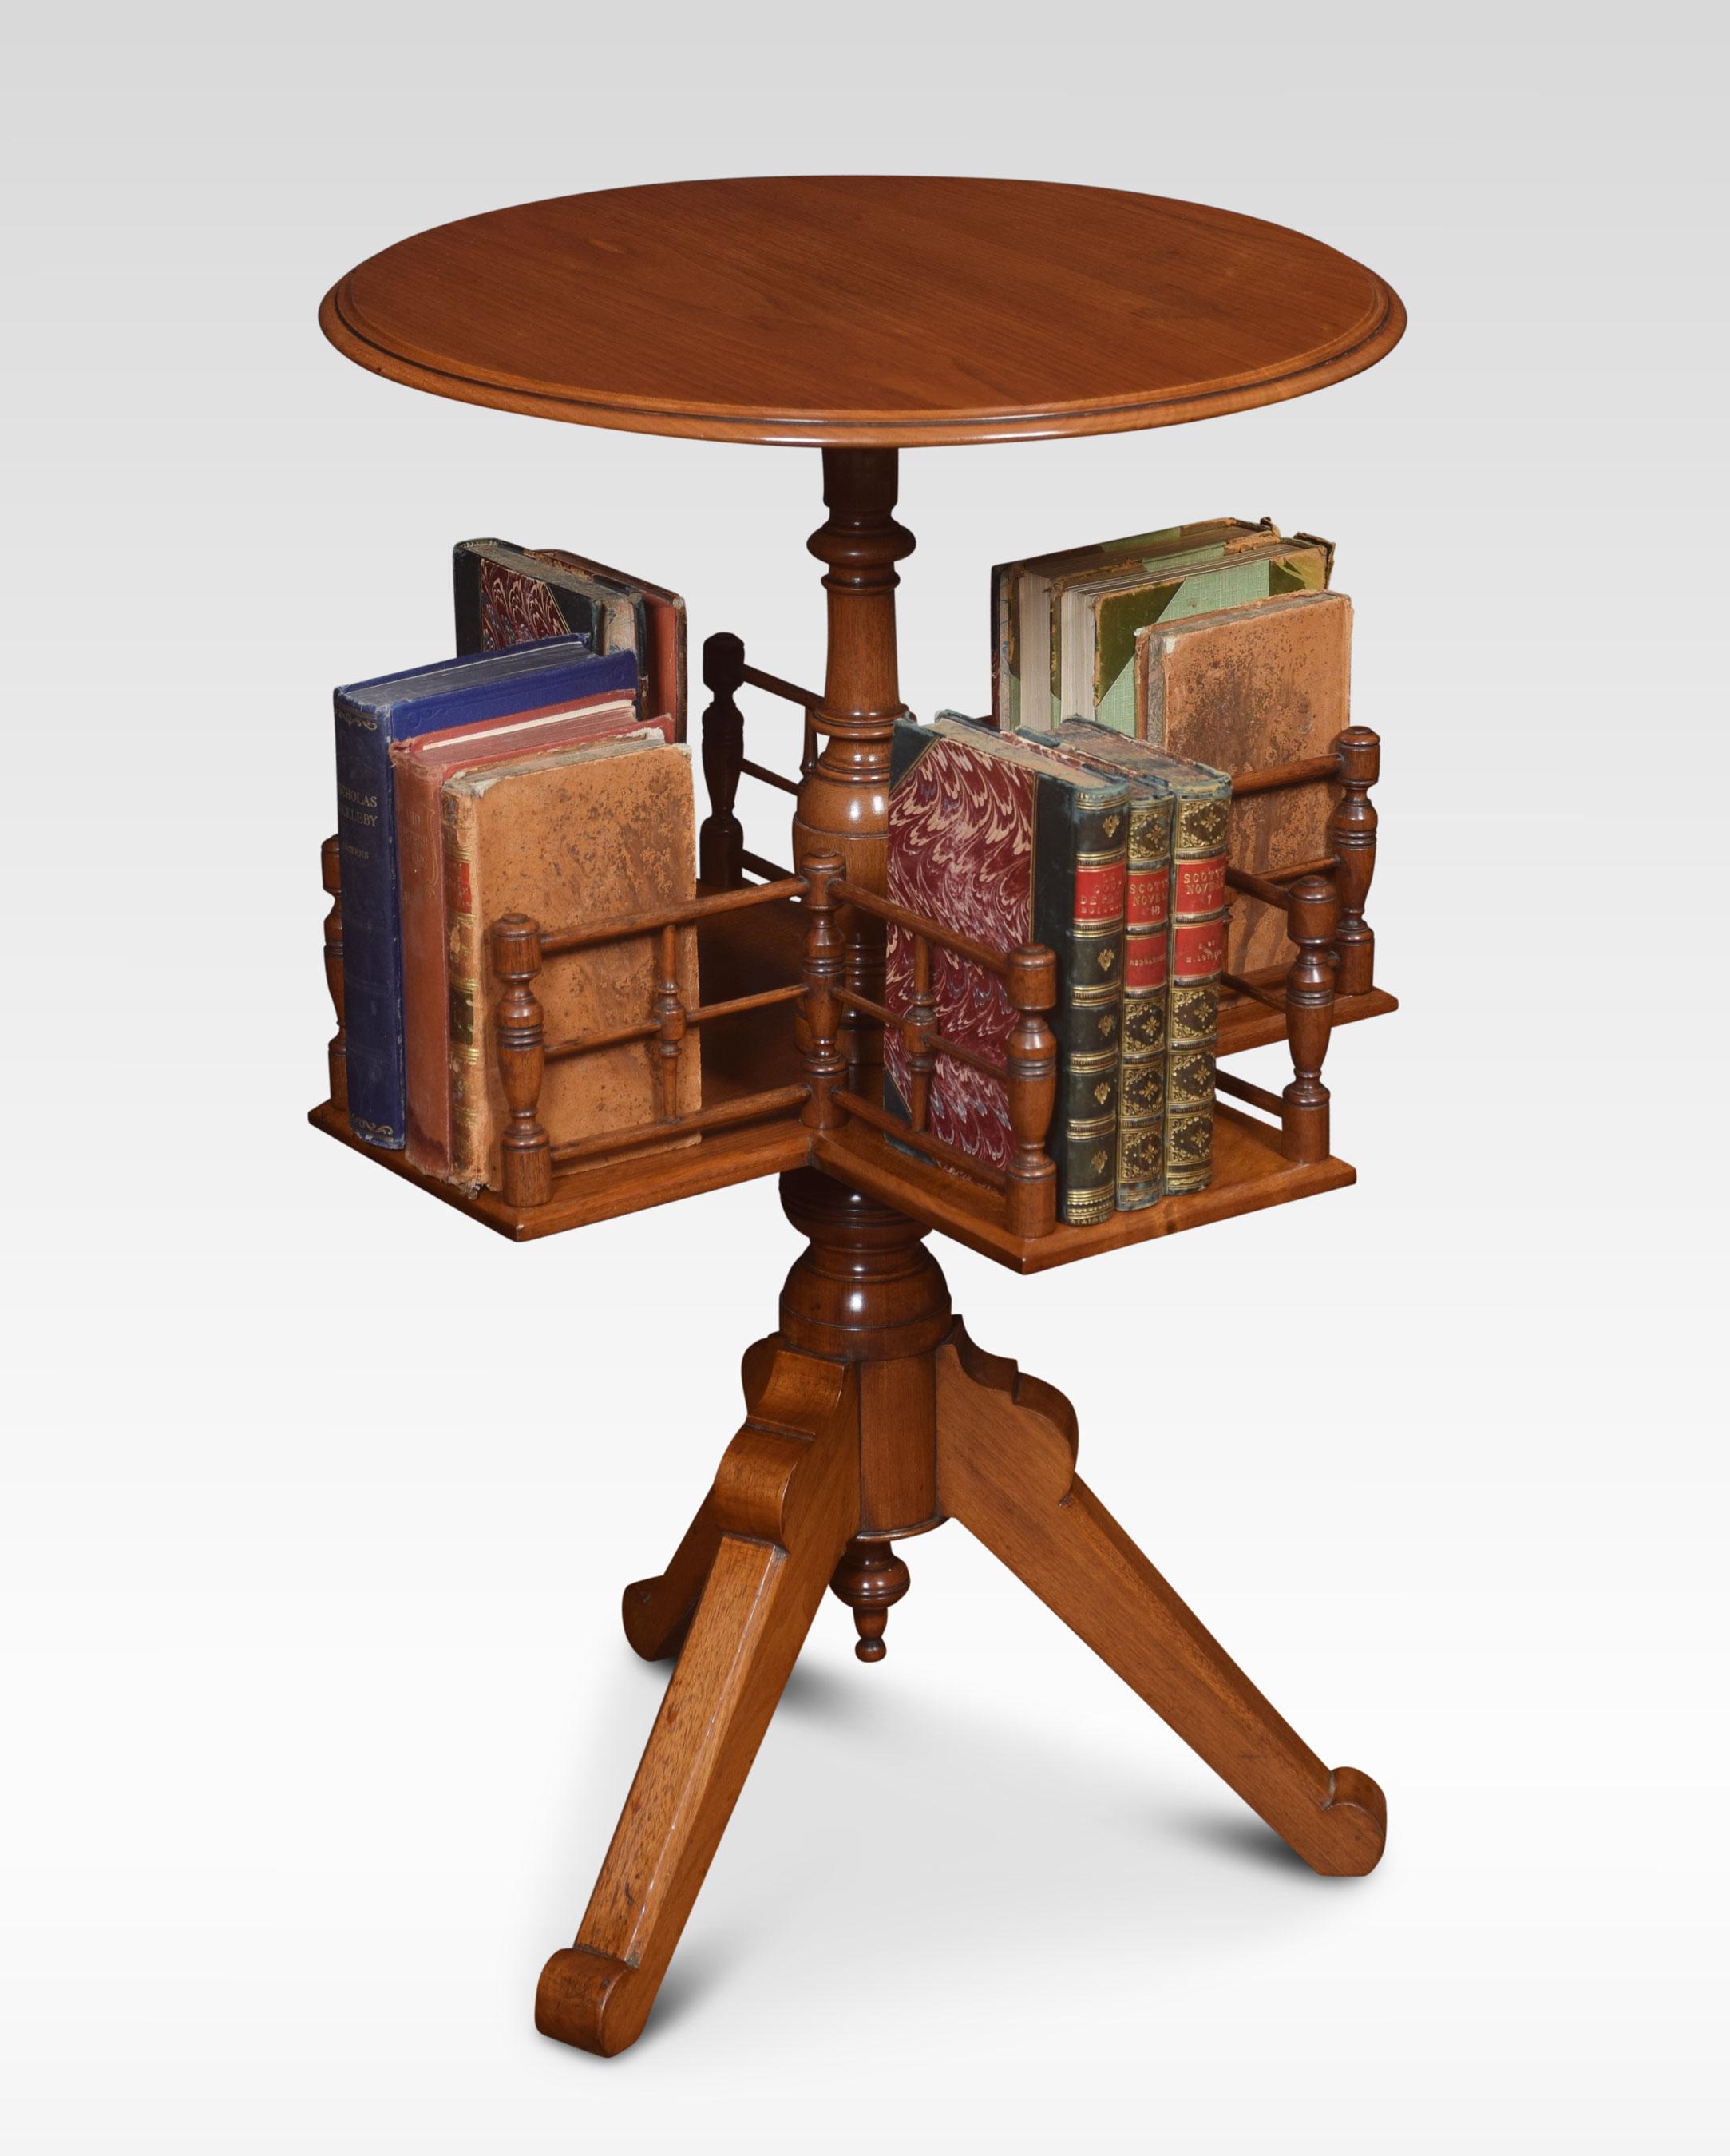 Walnut book table, the round top with moulded edge above a shaped under tier with a spindle gallery on a down swept tripod base.
Dimensions:
Height 28.5 inches
Width 18.5 inches
Depth 18.5 inches.